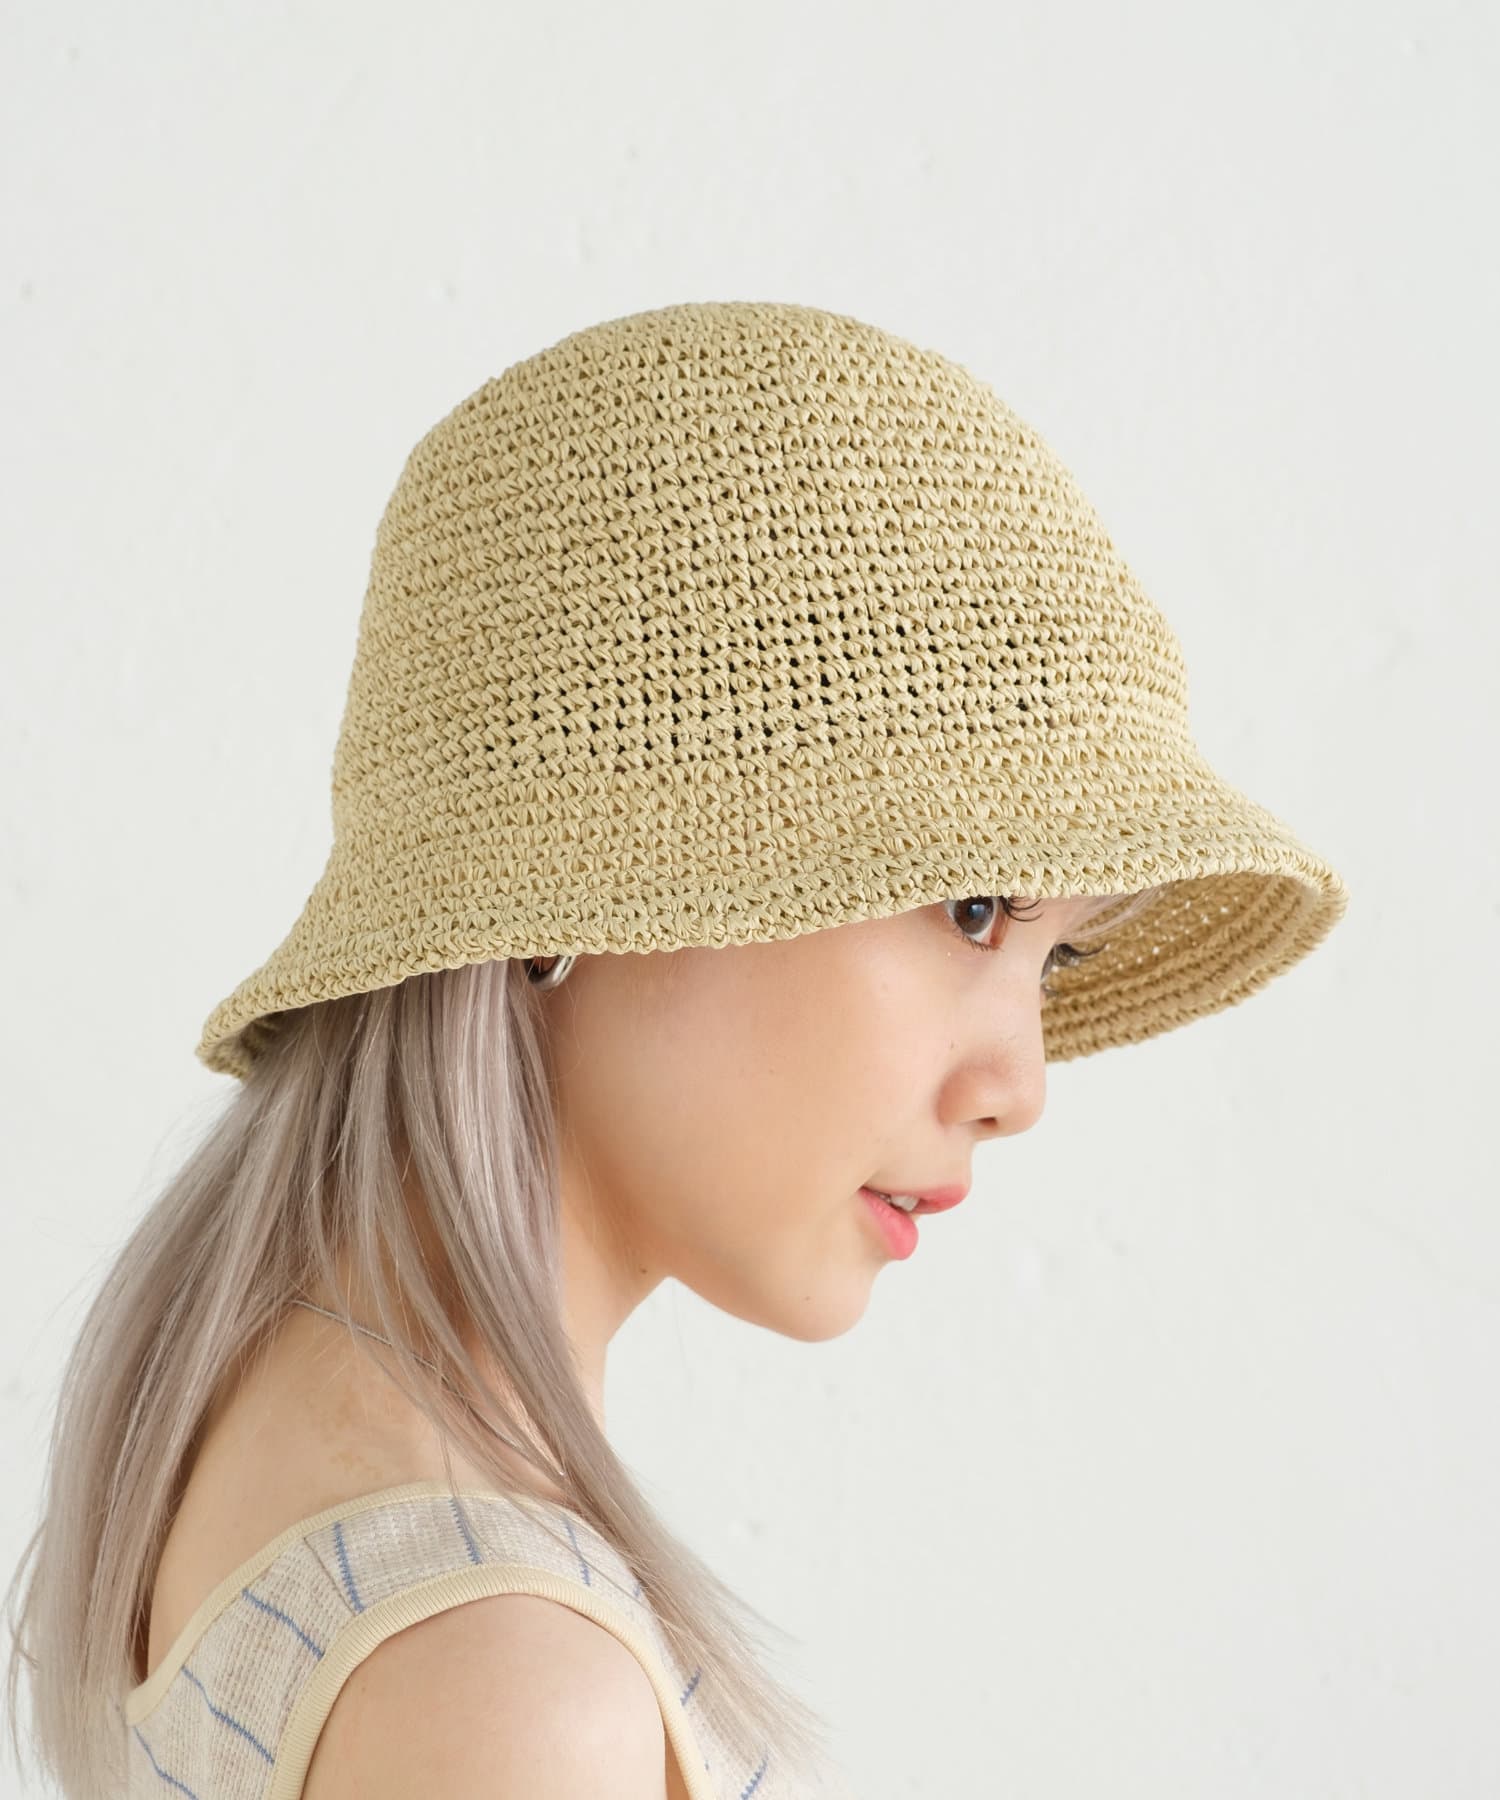 Kastane】HAND KNITTING PAPER HAT | OUTLET(アウトレット)レディース 